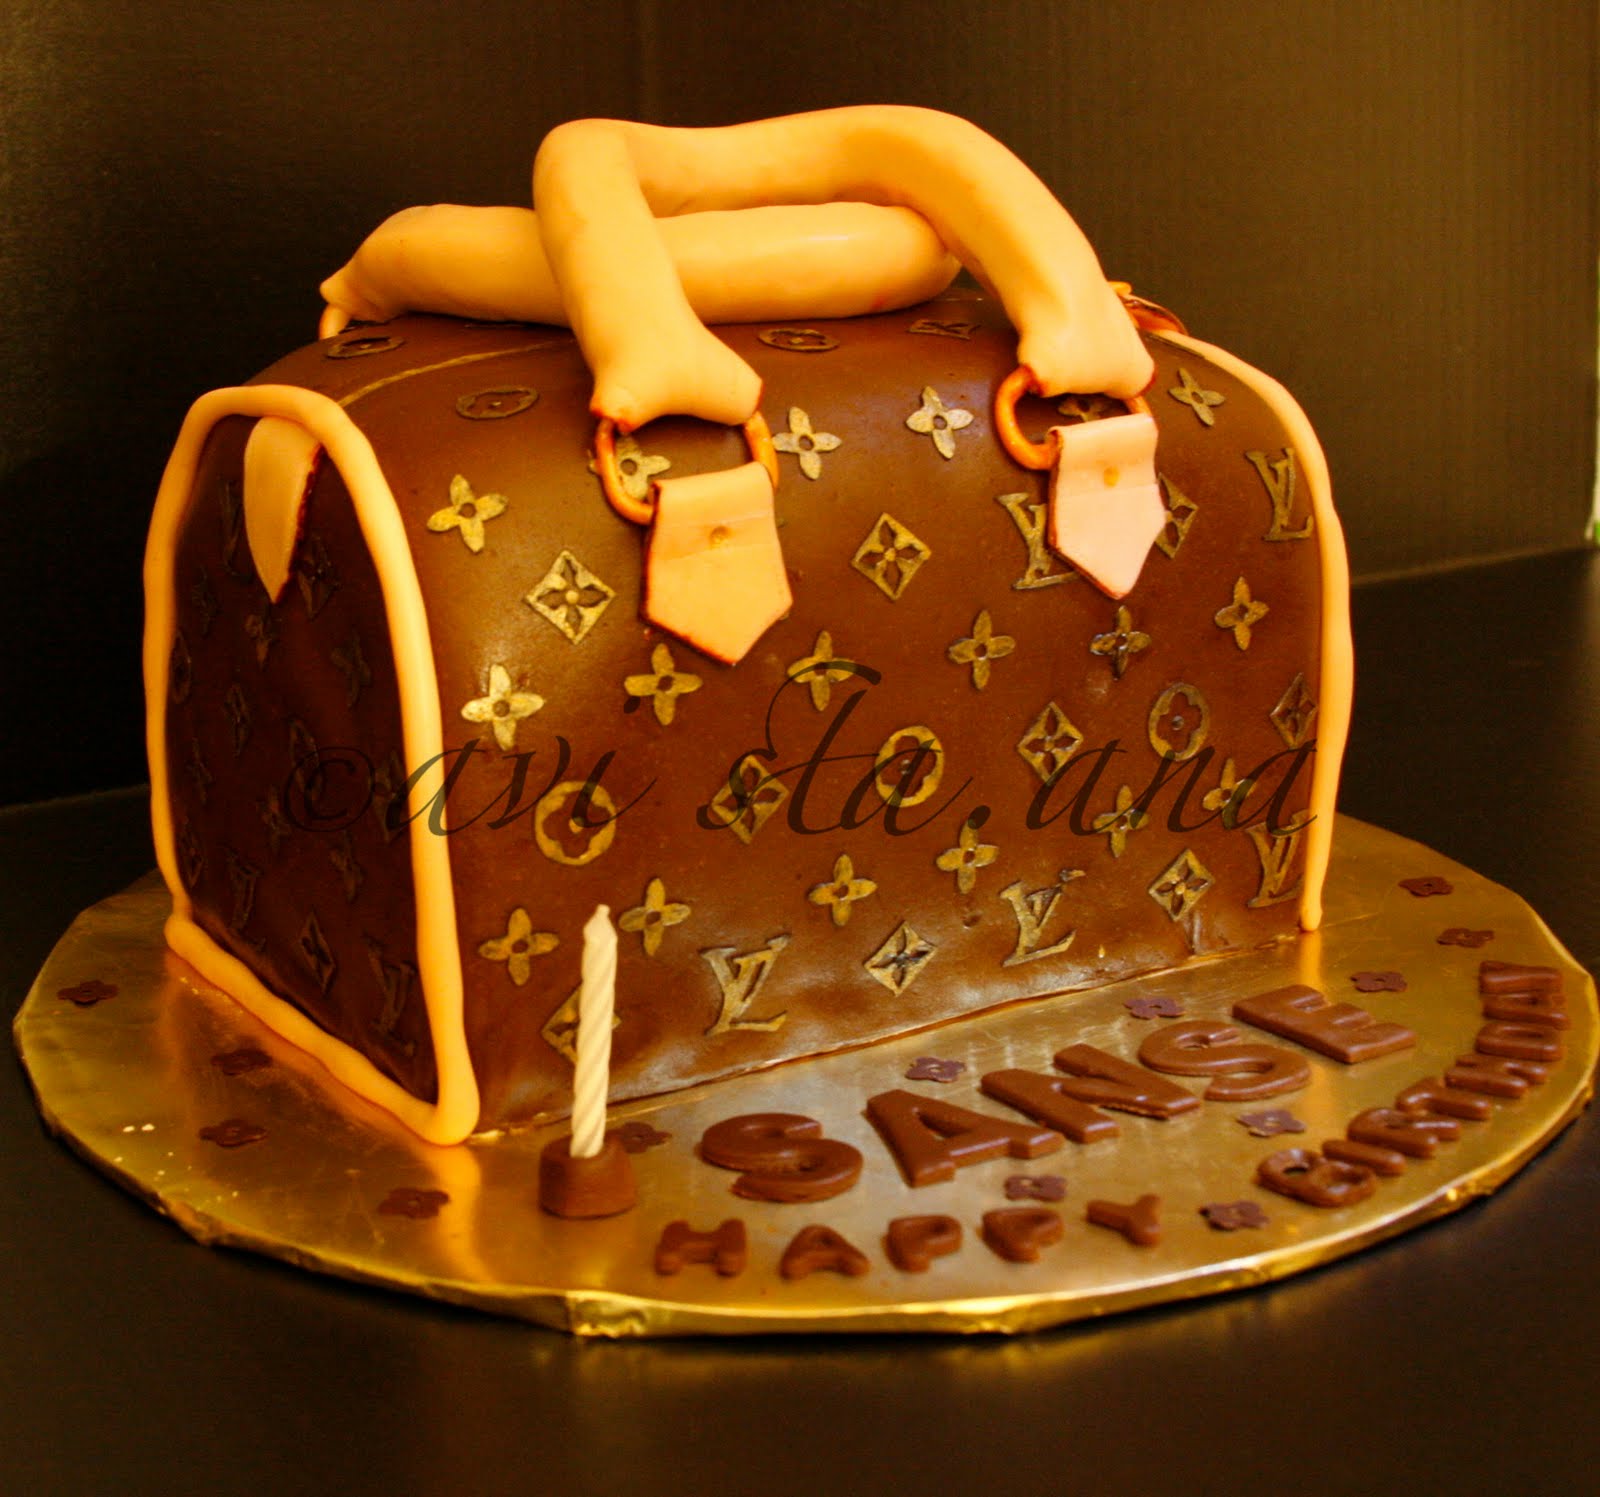 Louis Vuitton Birthday Cake, Design was a copy of a cake t …